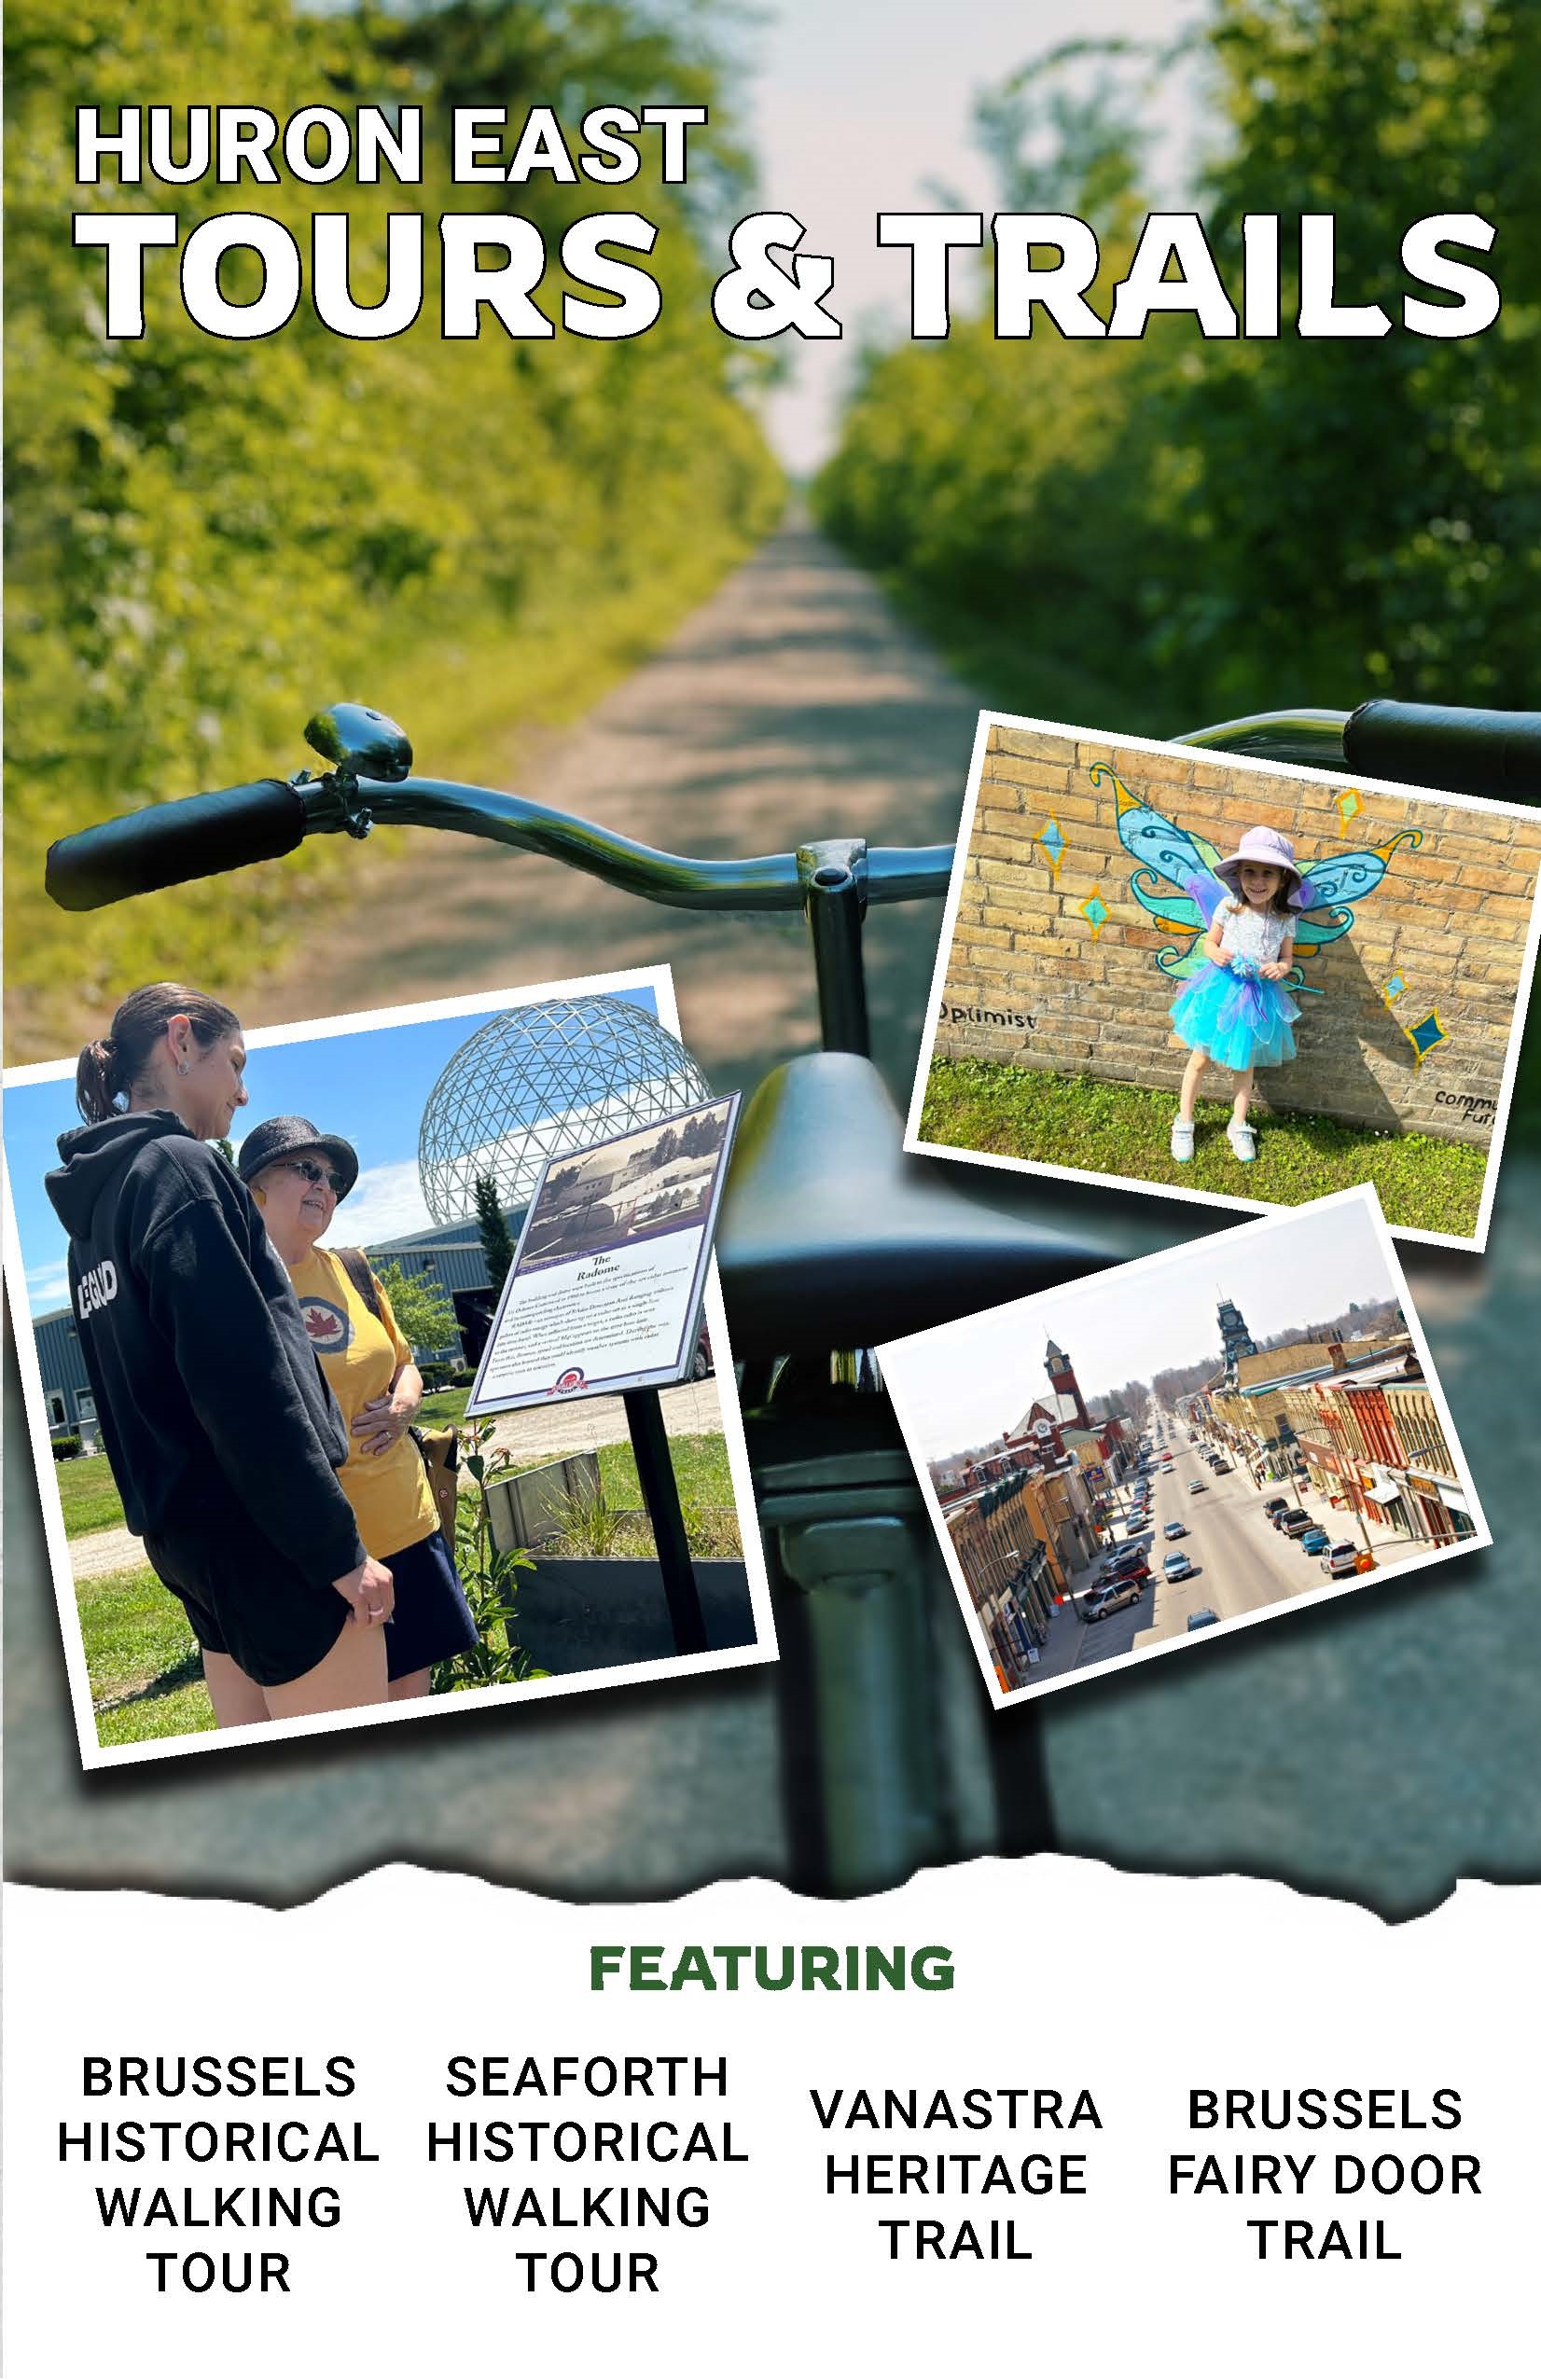 A picture of the cover of the Huron East Tours and Trails Guide.